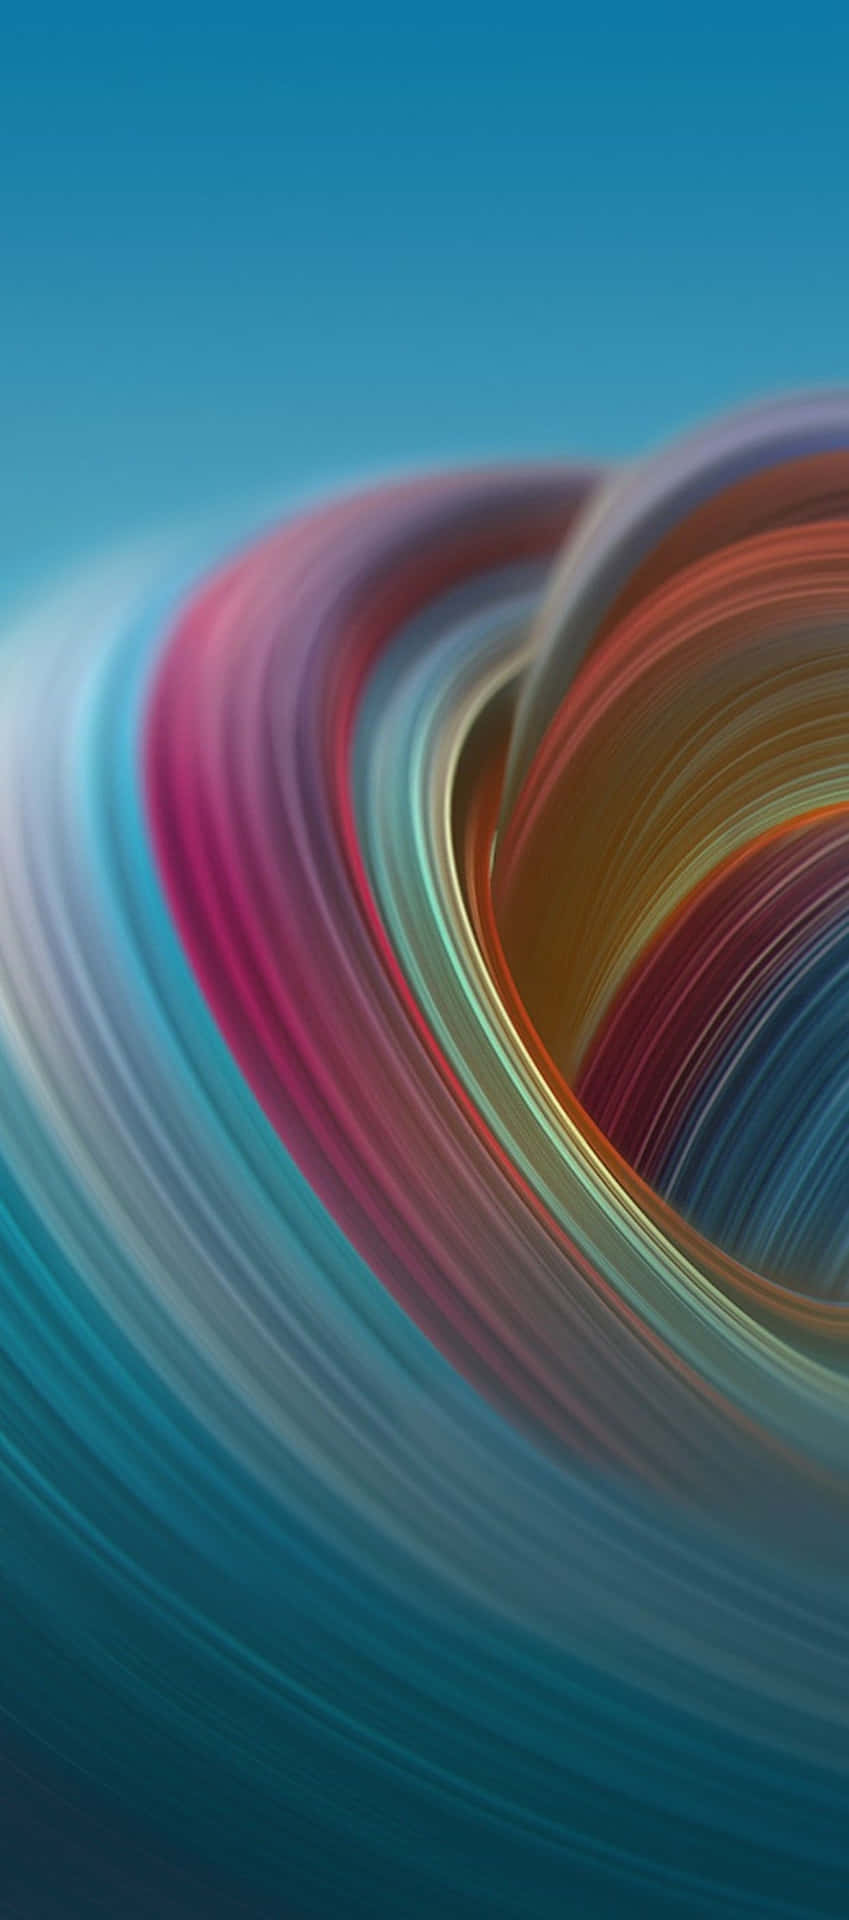 iPhone X Abstract Multi-Colored Whirlpool Wallpaper